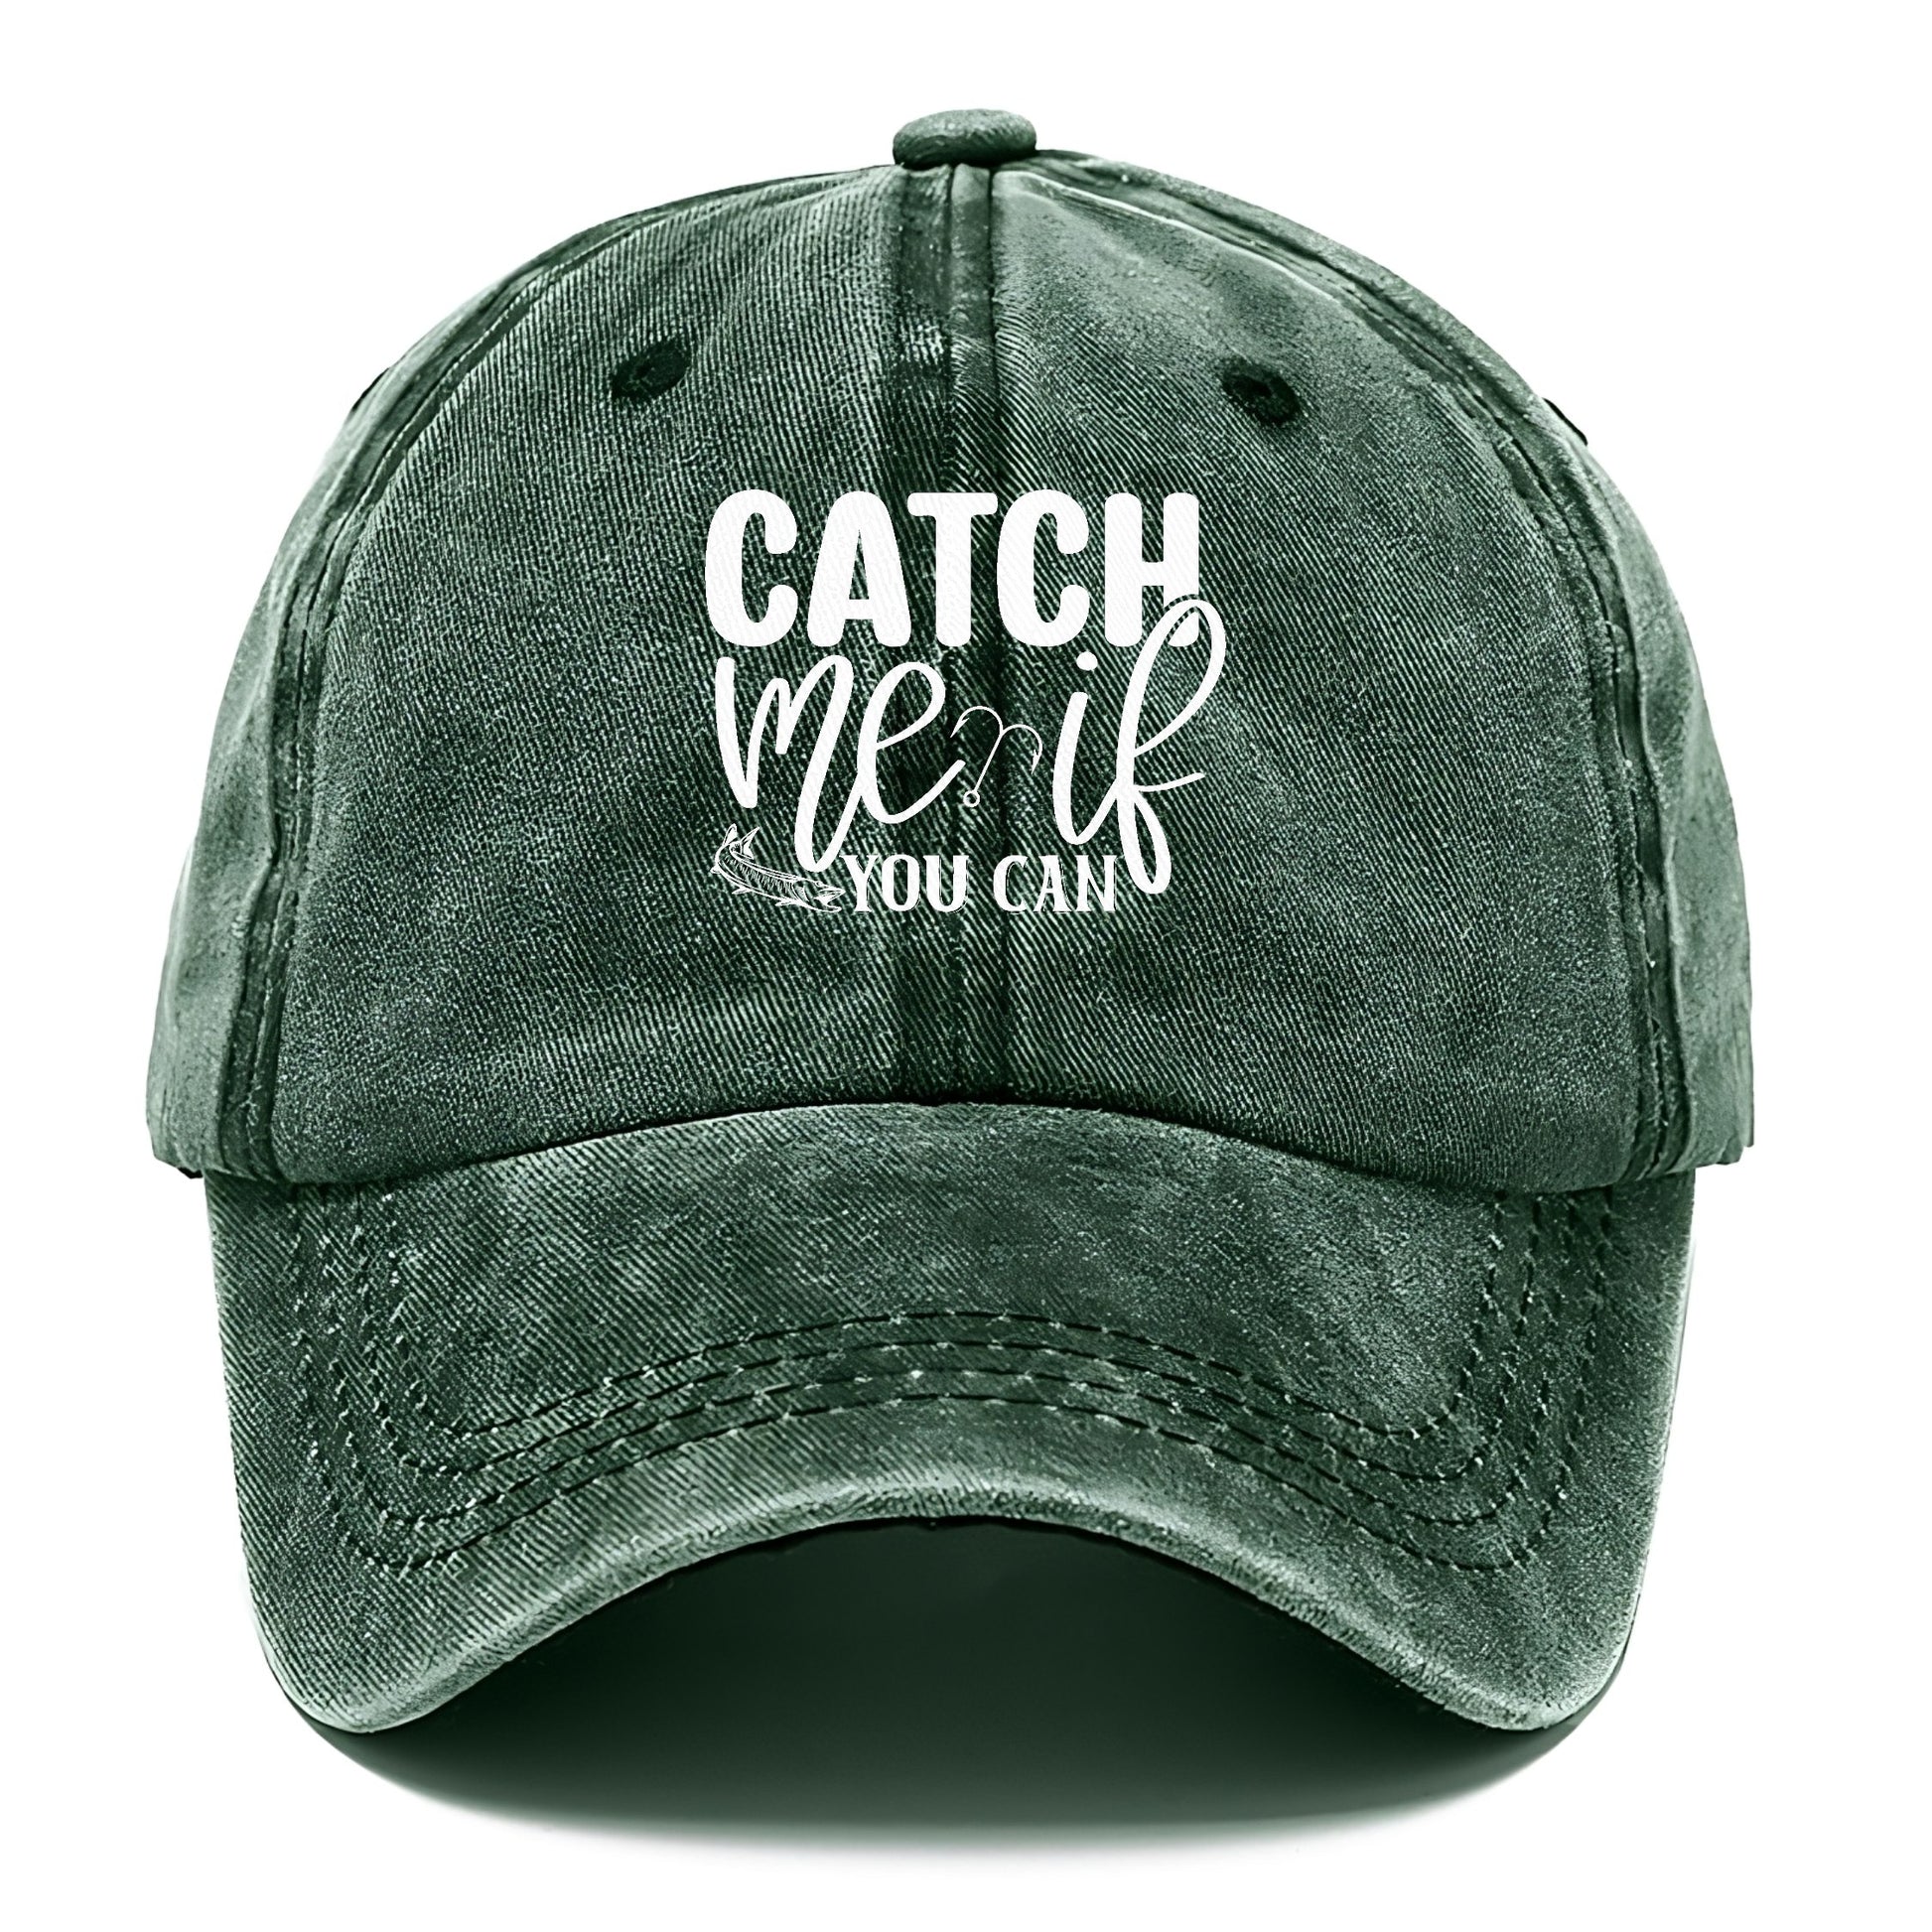 catch me if you can Hat